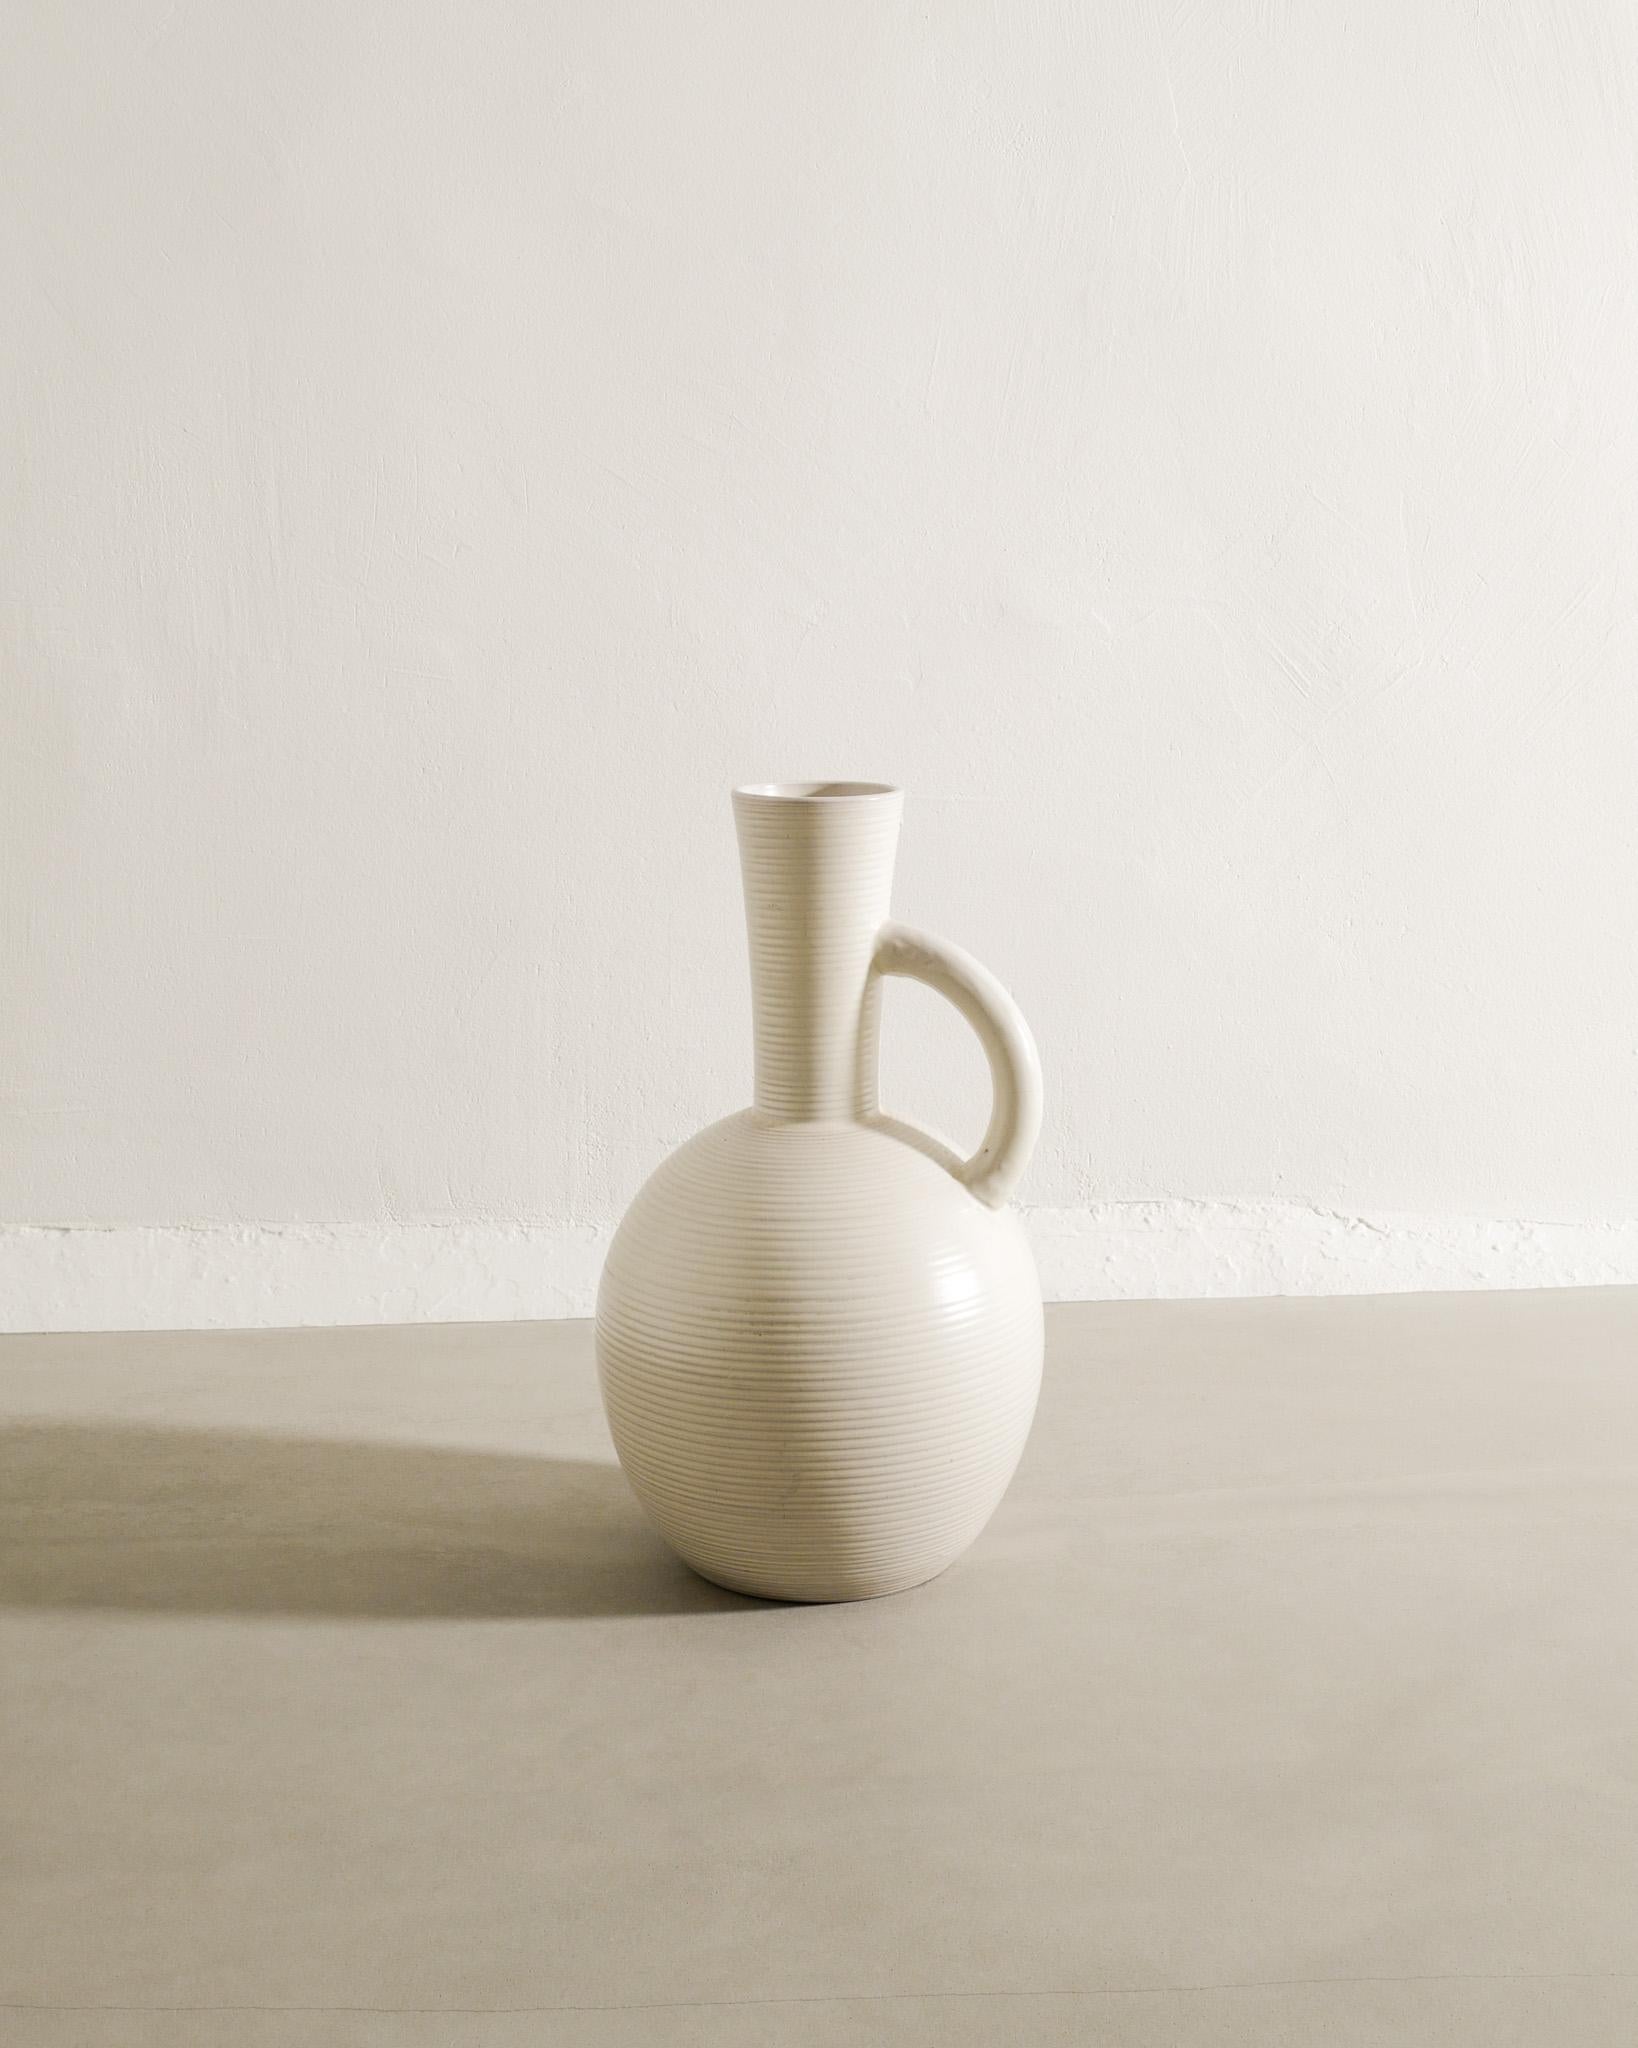 Rare large mid century stoneware / ceramic floor vase pitcher in creamy white glas by Andersson & Johansson for Höganäs produced in Sweden, 1940s. In good original condition. Signed. 

Dimensions: H: 52 cm / 20.5